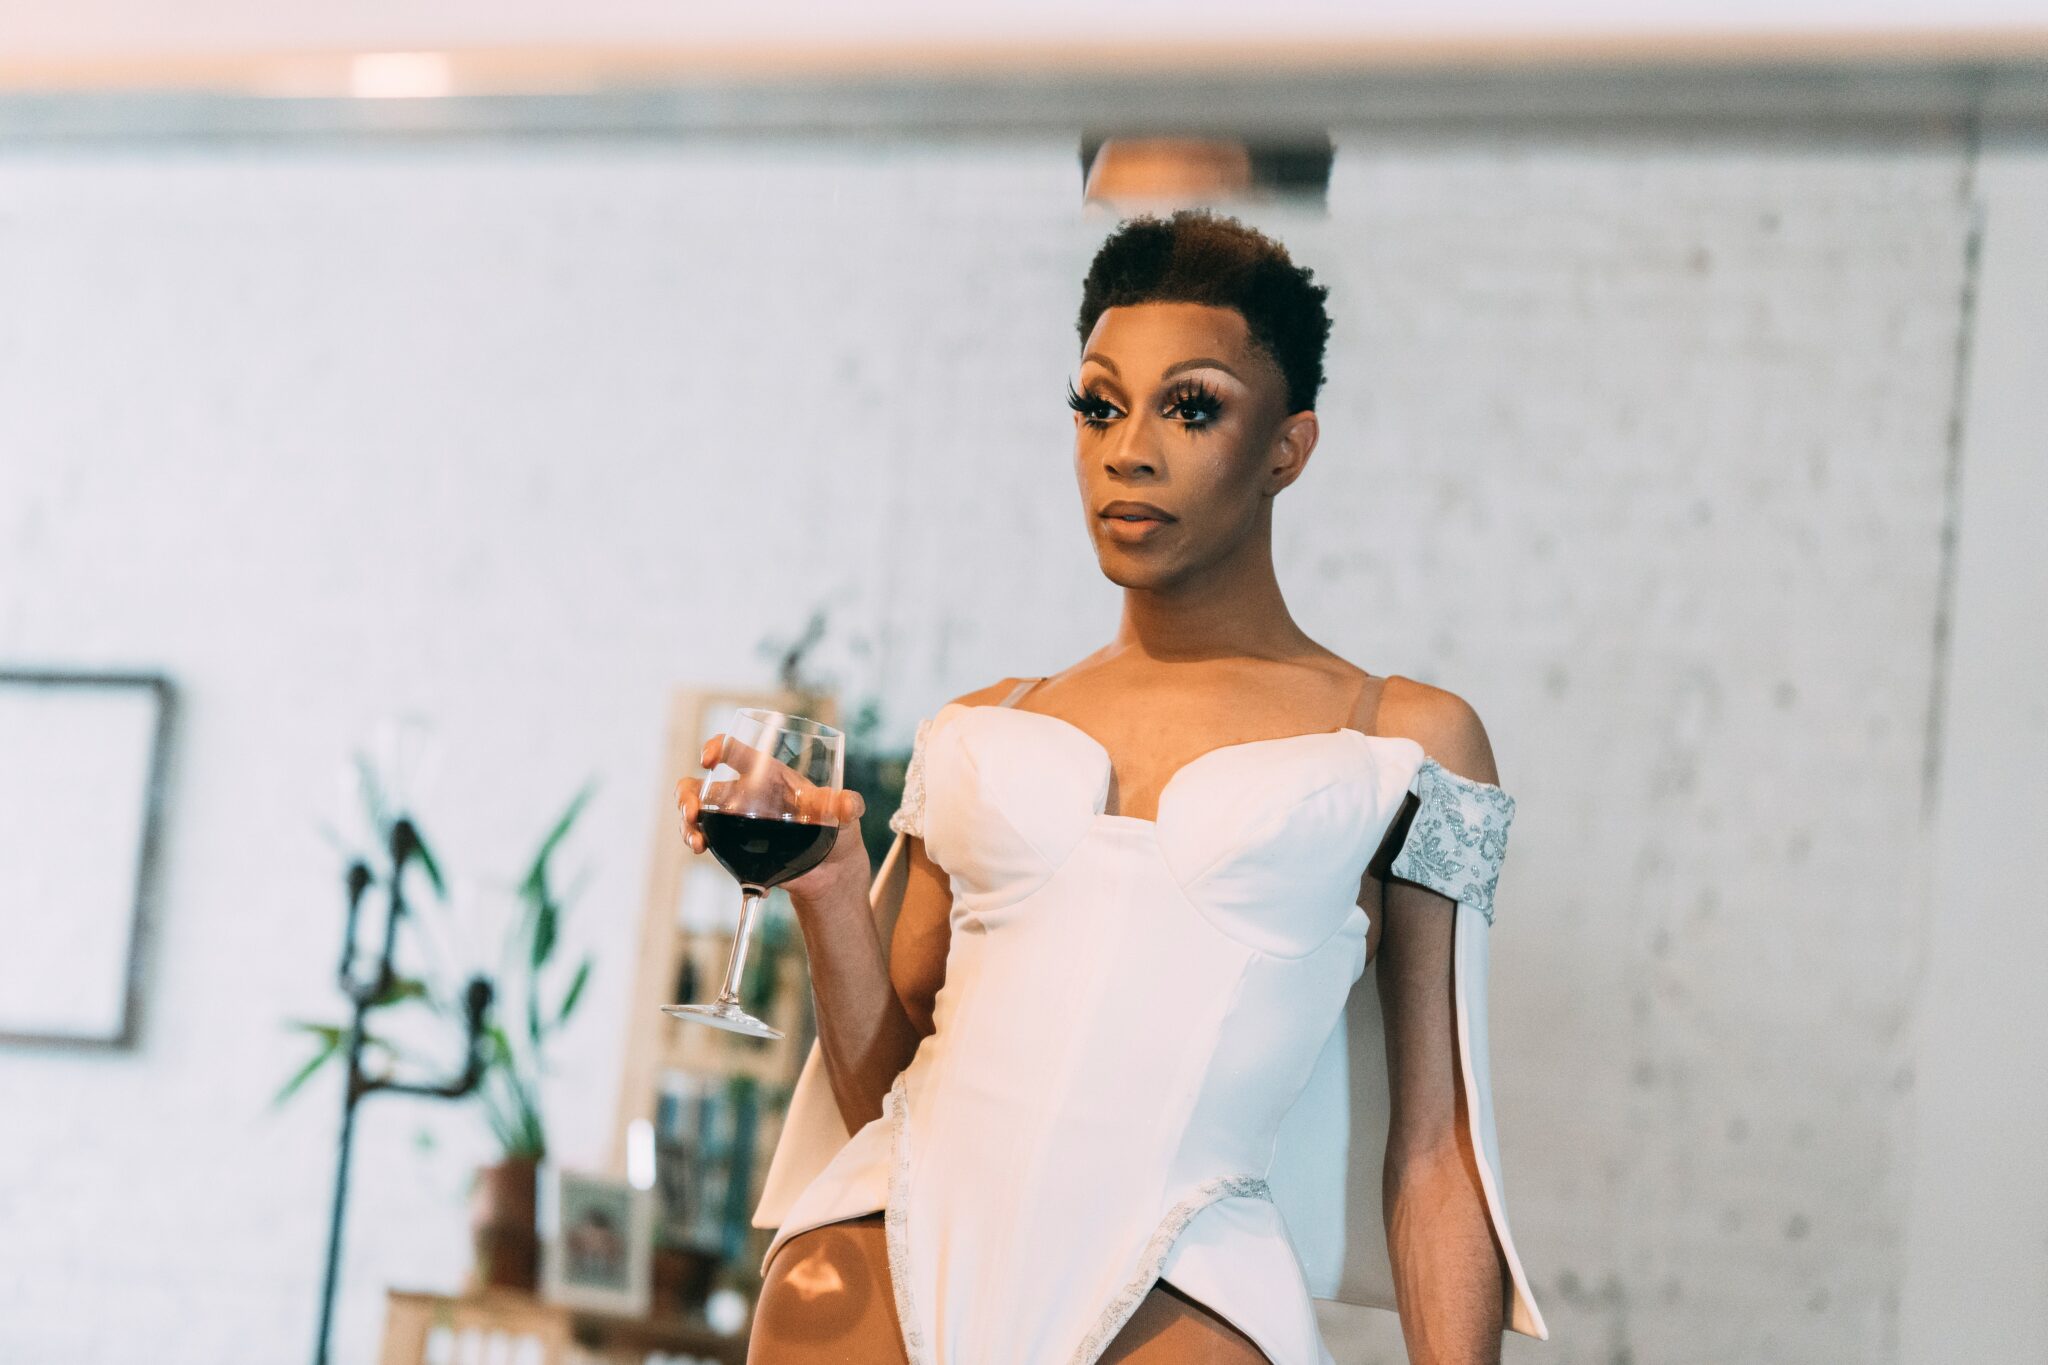 A drag queen getting ready in a studio, drinking red wine and wearing a white leotard.